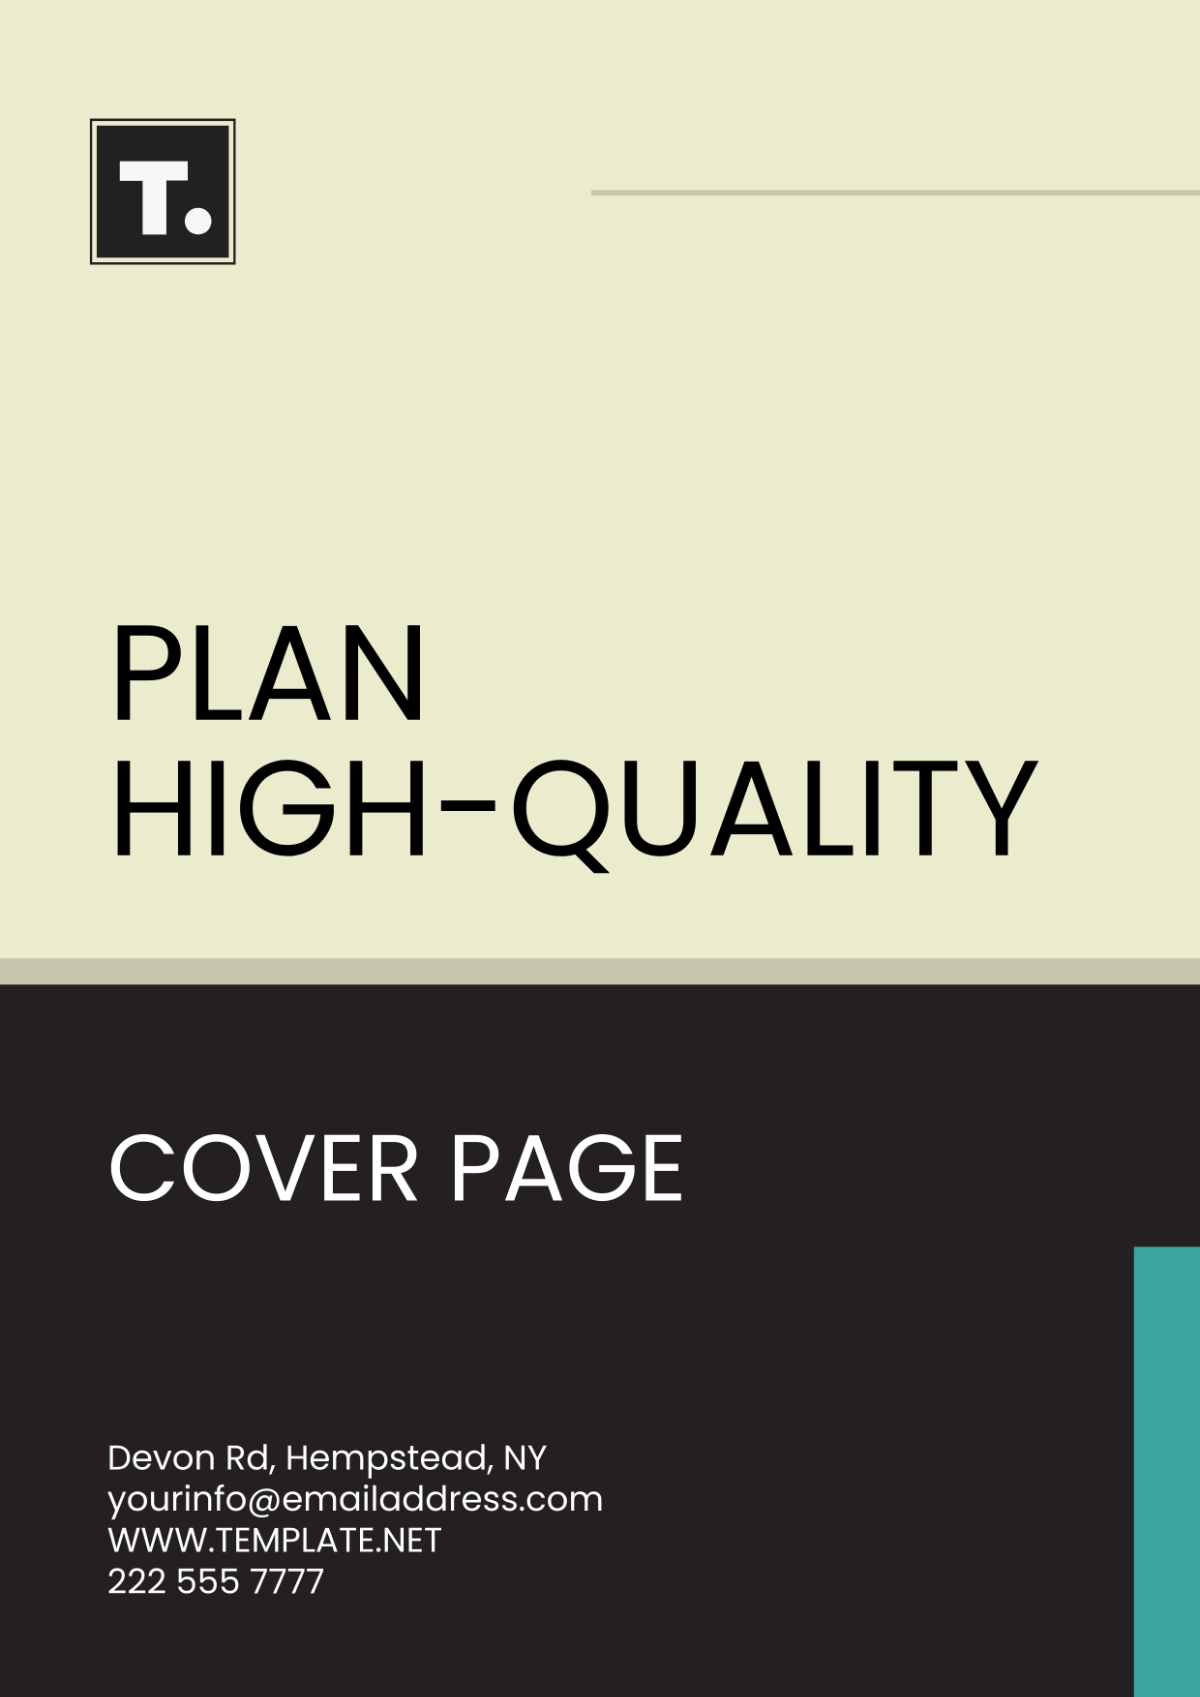 Plan High-quality Cover Page